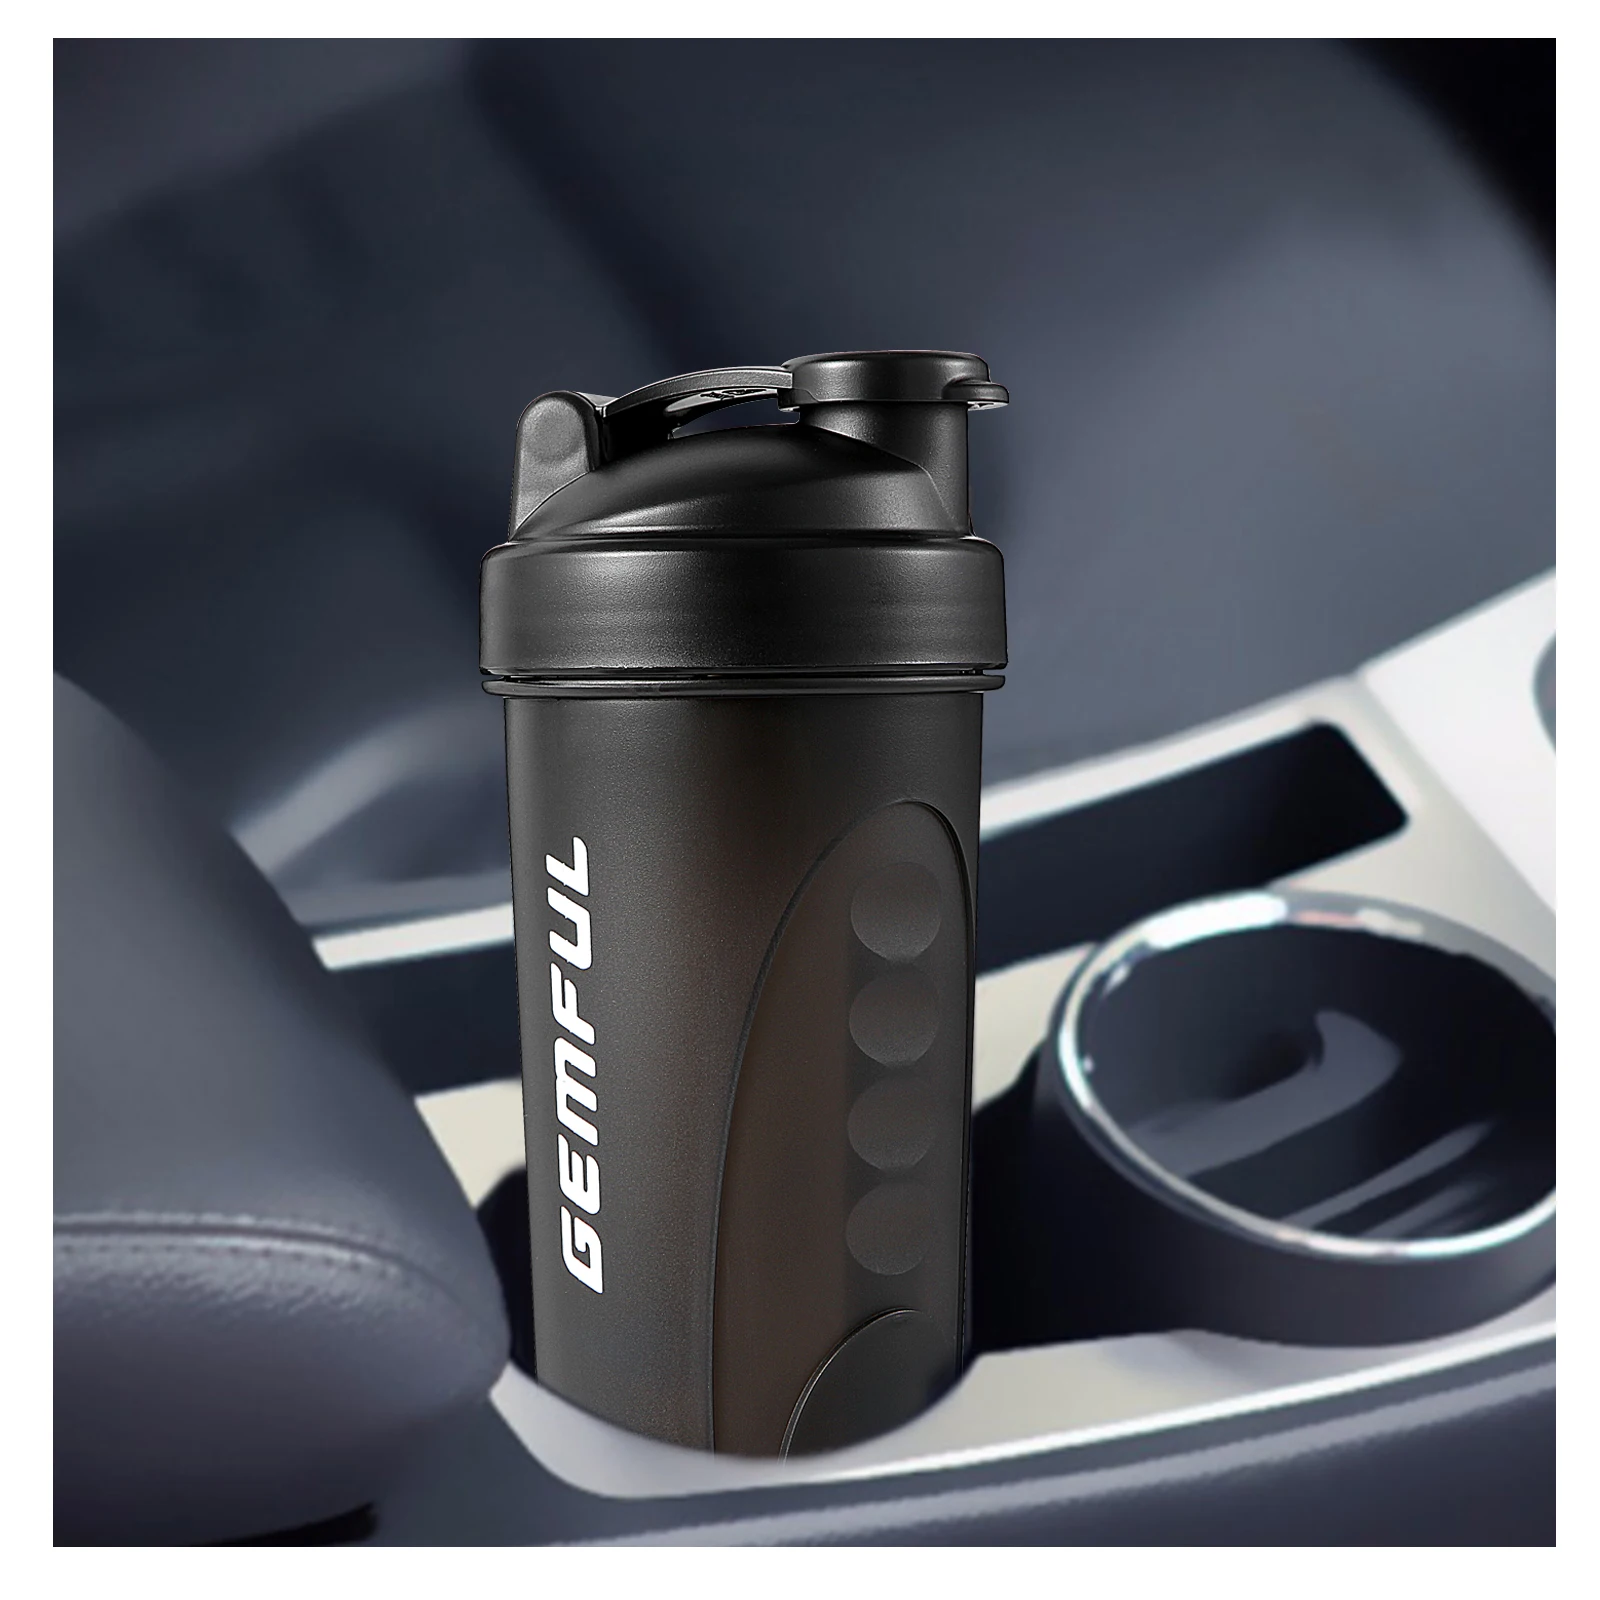 https://ae01.alicdn.com/kf/S41ff5d1837b945e3b9a6950670db47d7D/700ml-Fitness-Shaker-Cup-24oz-BPA-free-with-Scale-and-Mixing-Ball-Ideal-for-Protein-Whey.jpg